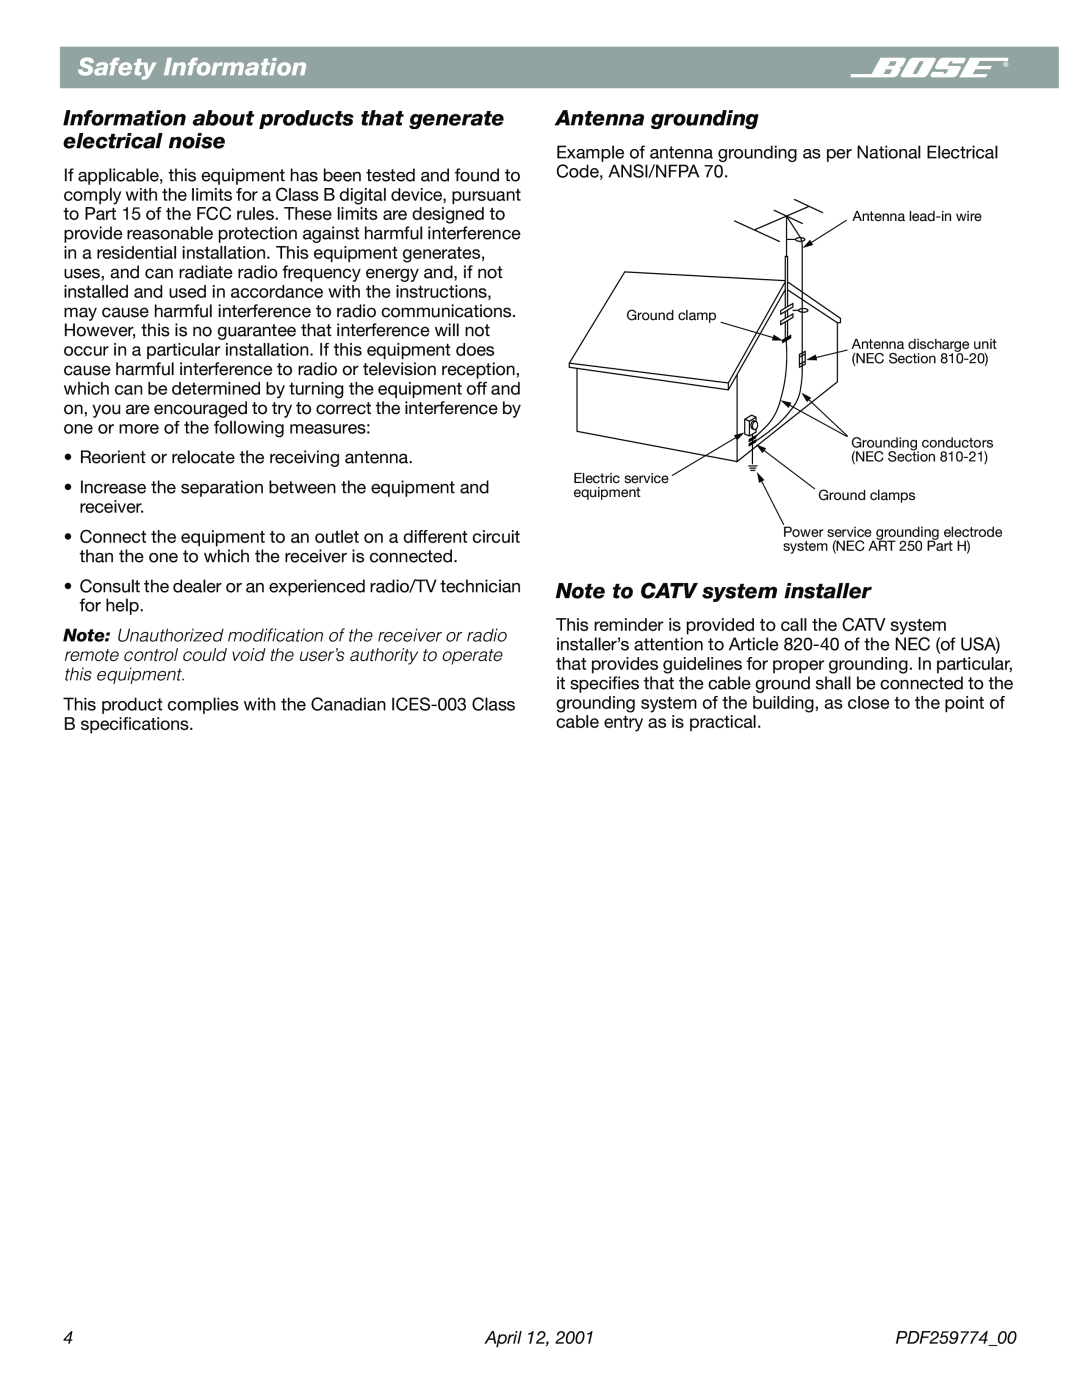 Bose PDF259774_00 manual Information about products that generate electrical noise, Antenna grounding, Safety Information 